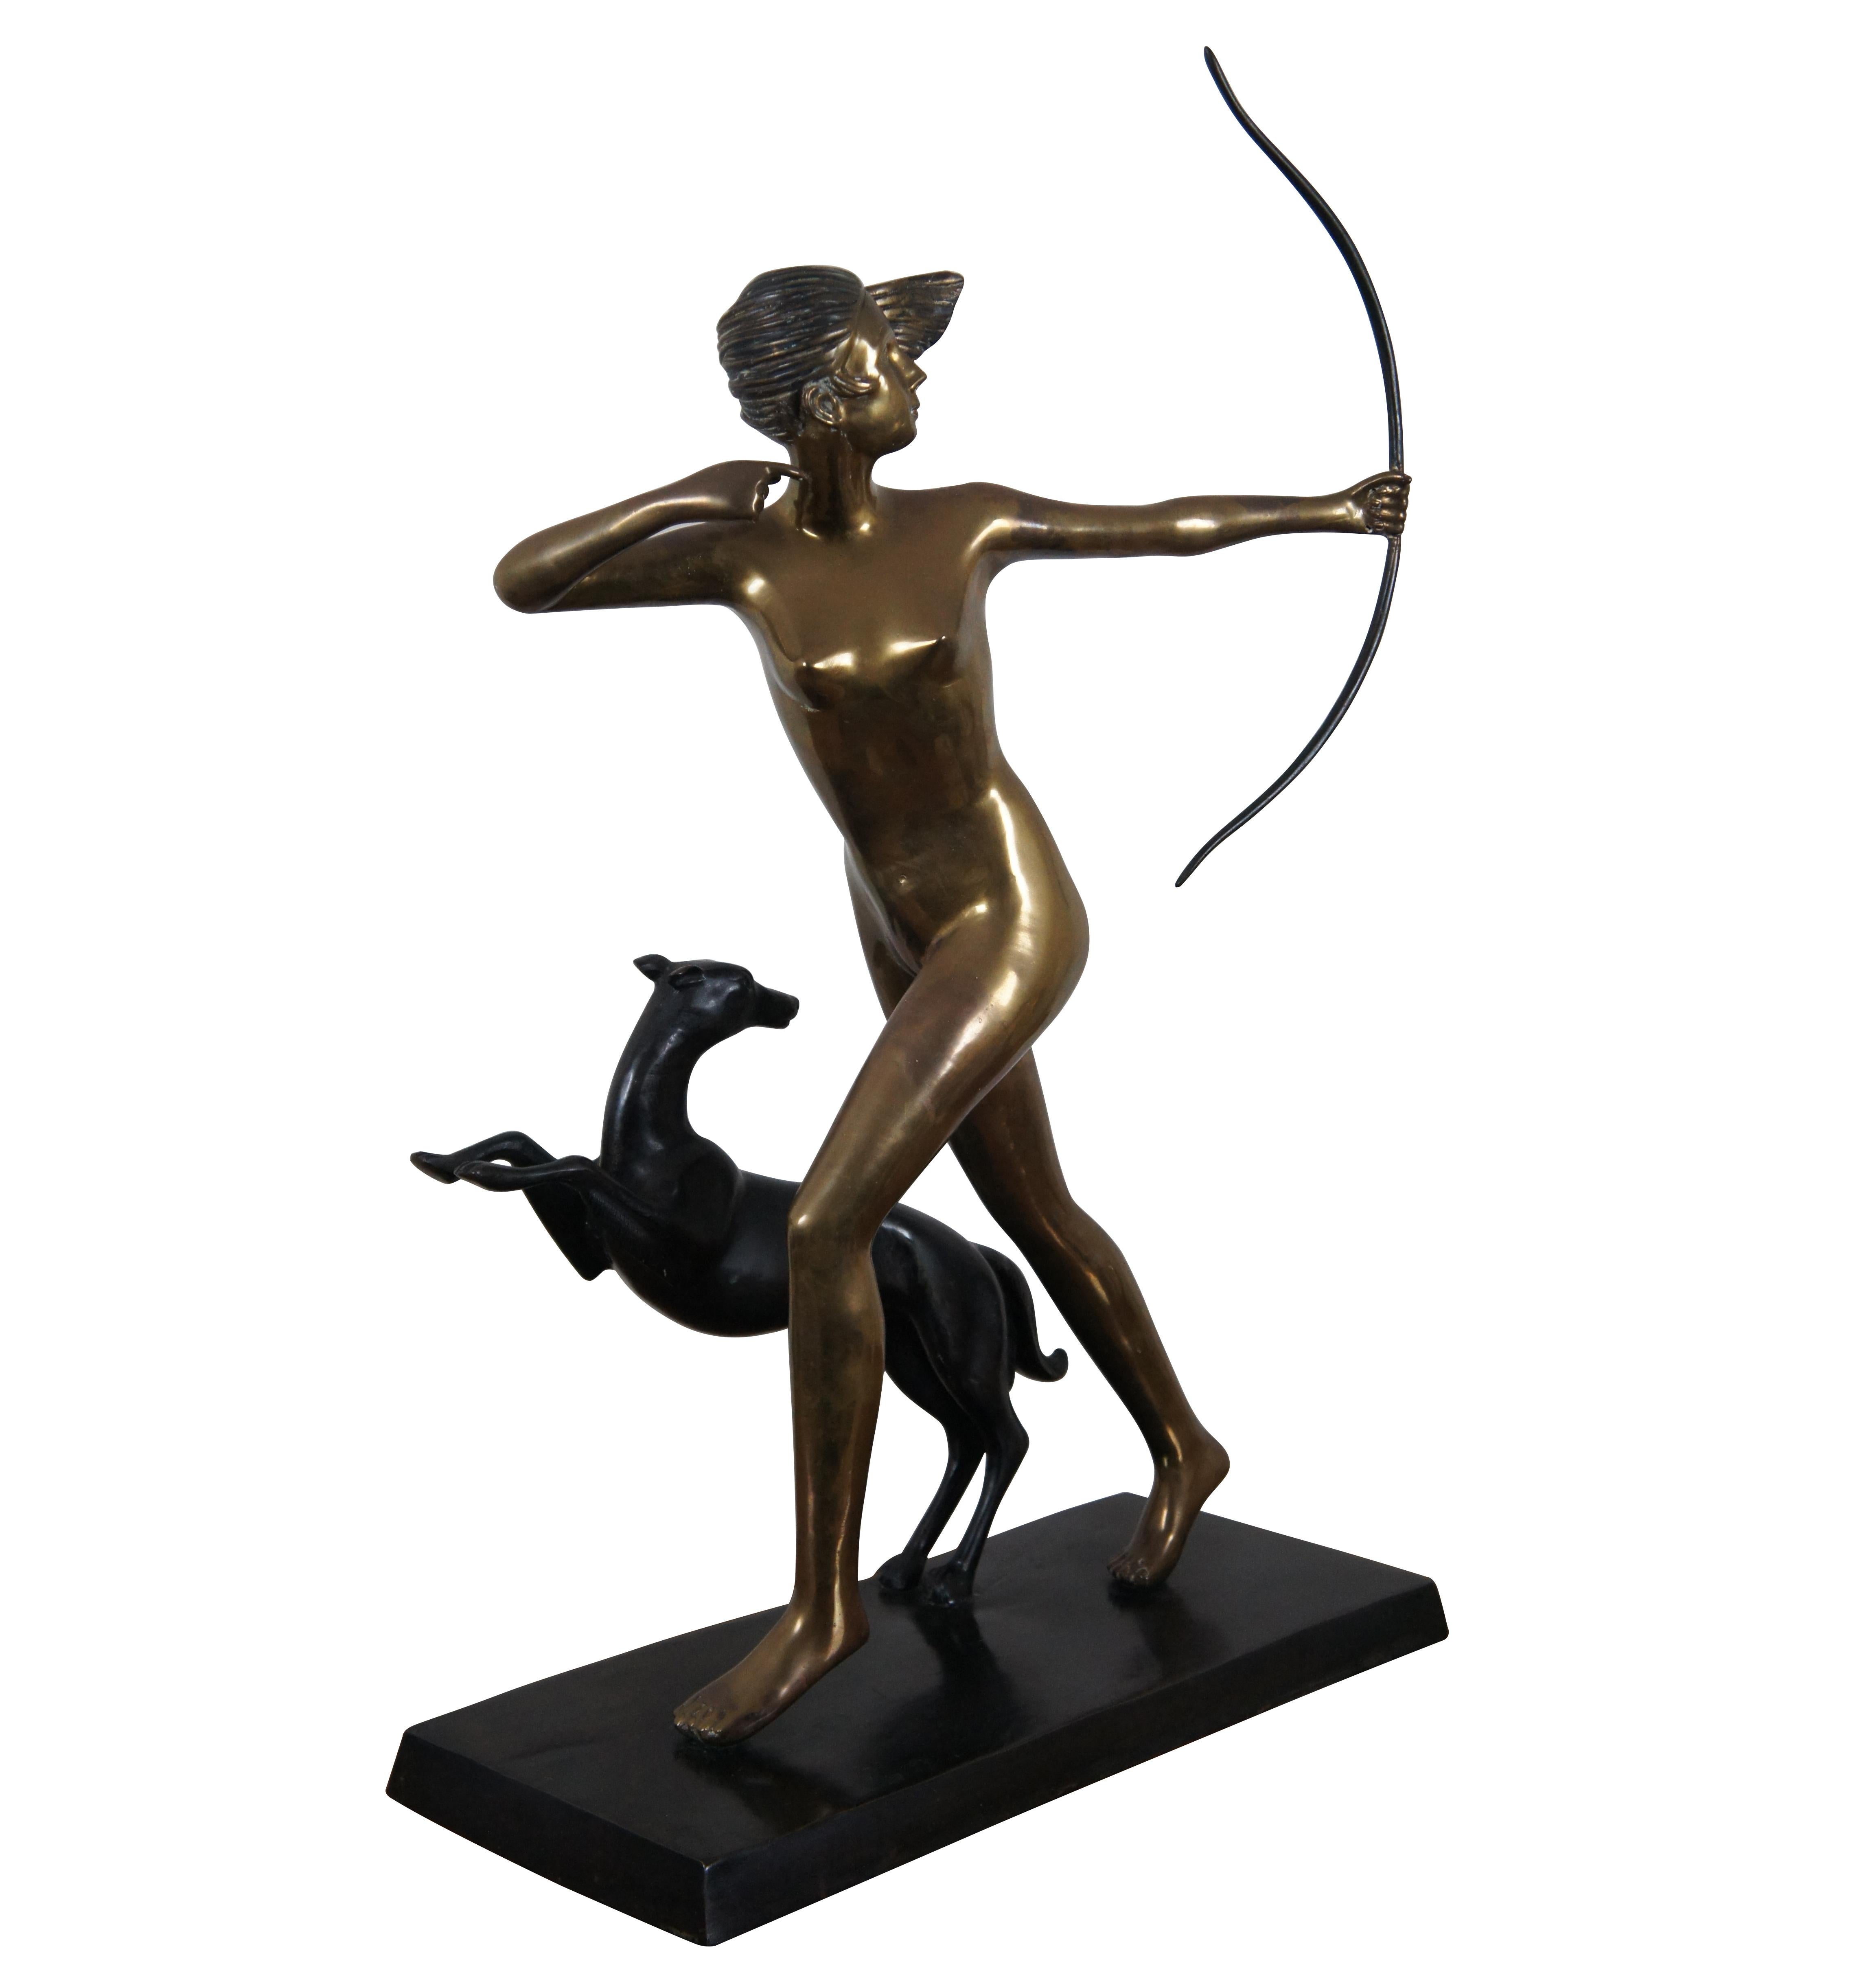 A large and impressive vintage art deco style bronze and brass nude figural sculpture of the Greek / Roman goddess of the hunt Artemis / Diana, shooting a bow as she runs side by side with a Greyhound dog. Marked / signed on base.

While Diana is